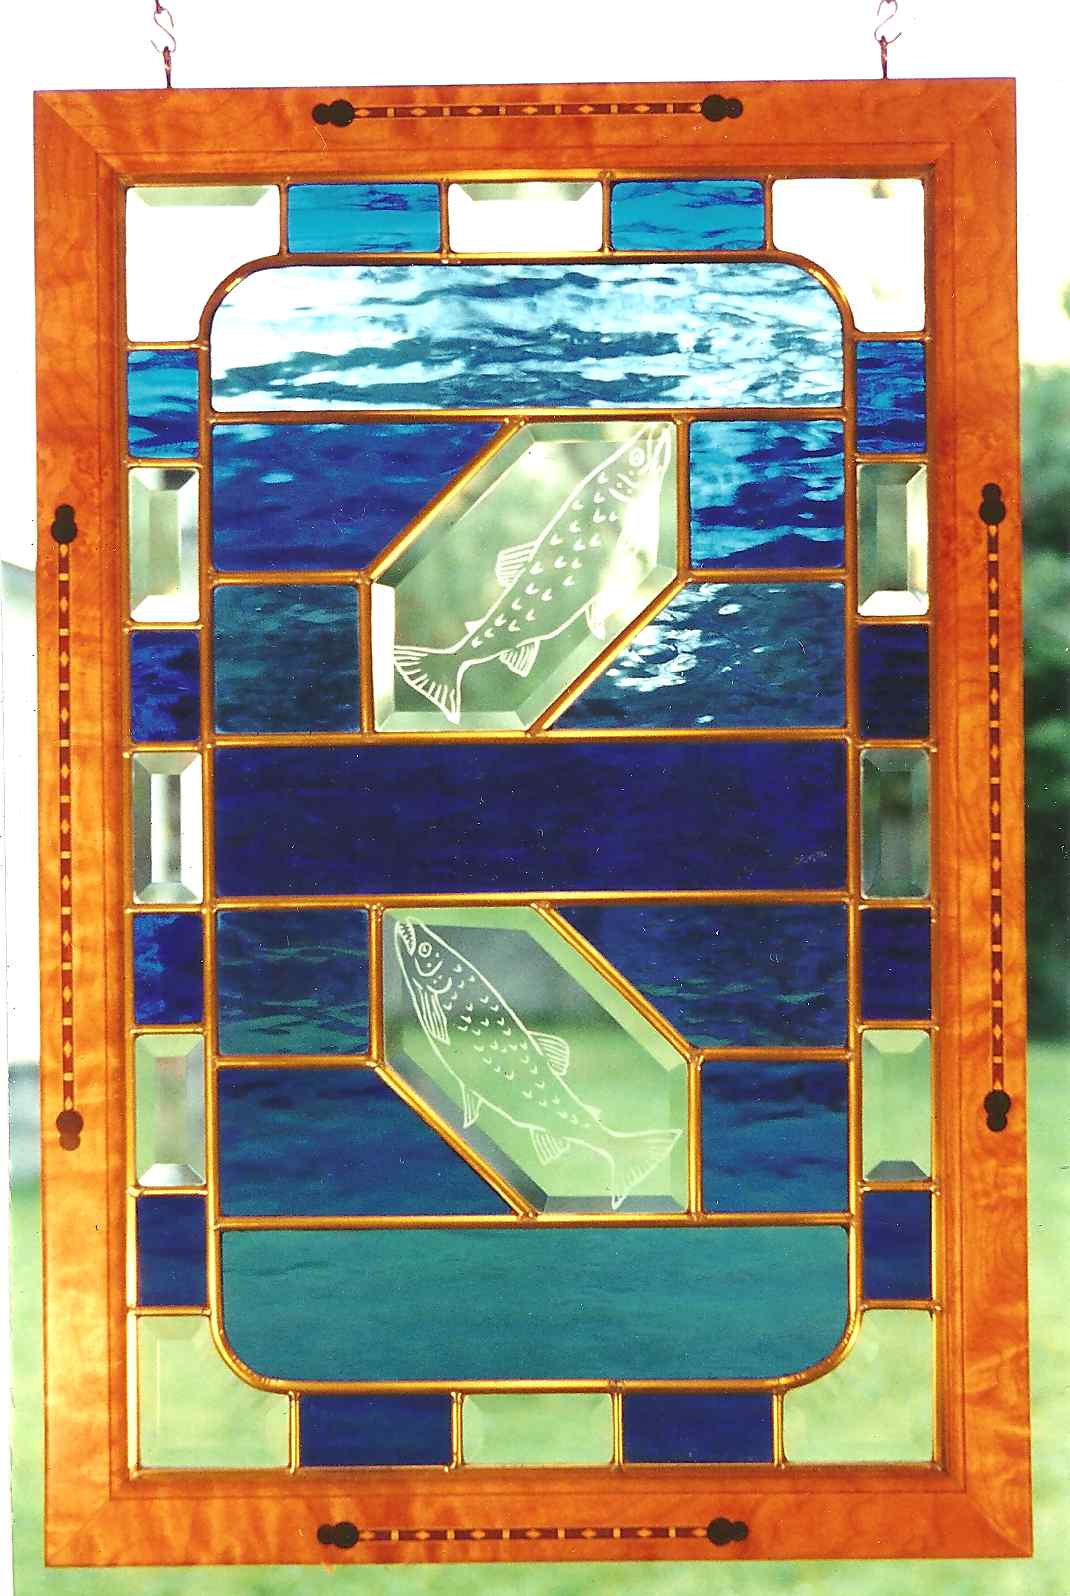 Photograph of a stained glass window featuring two salmon in it